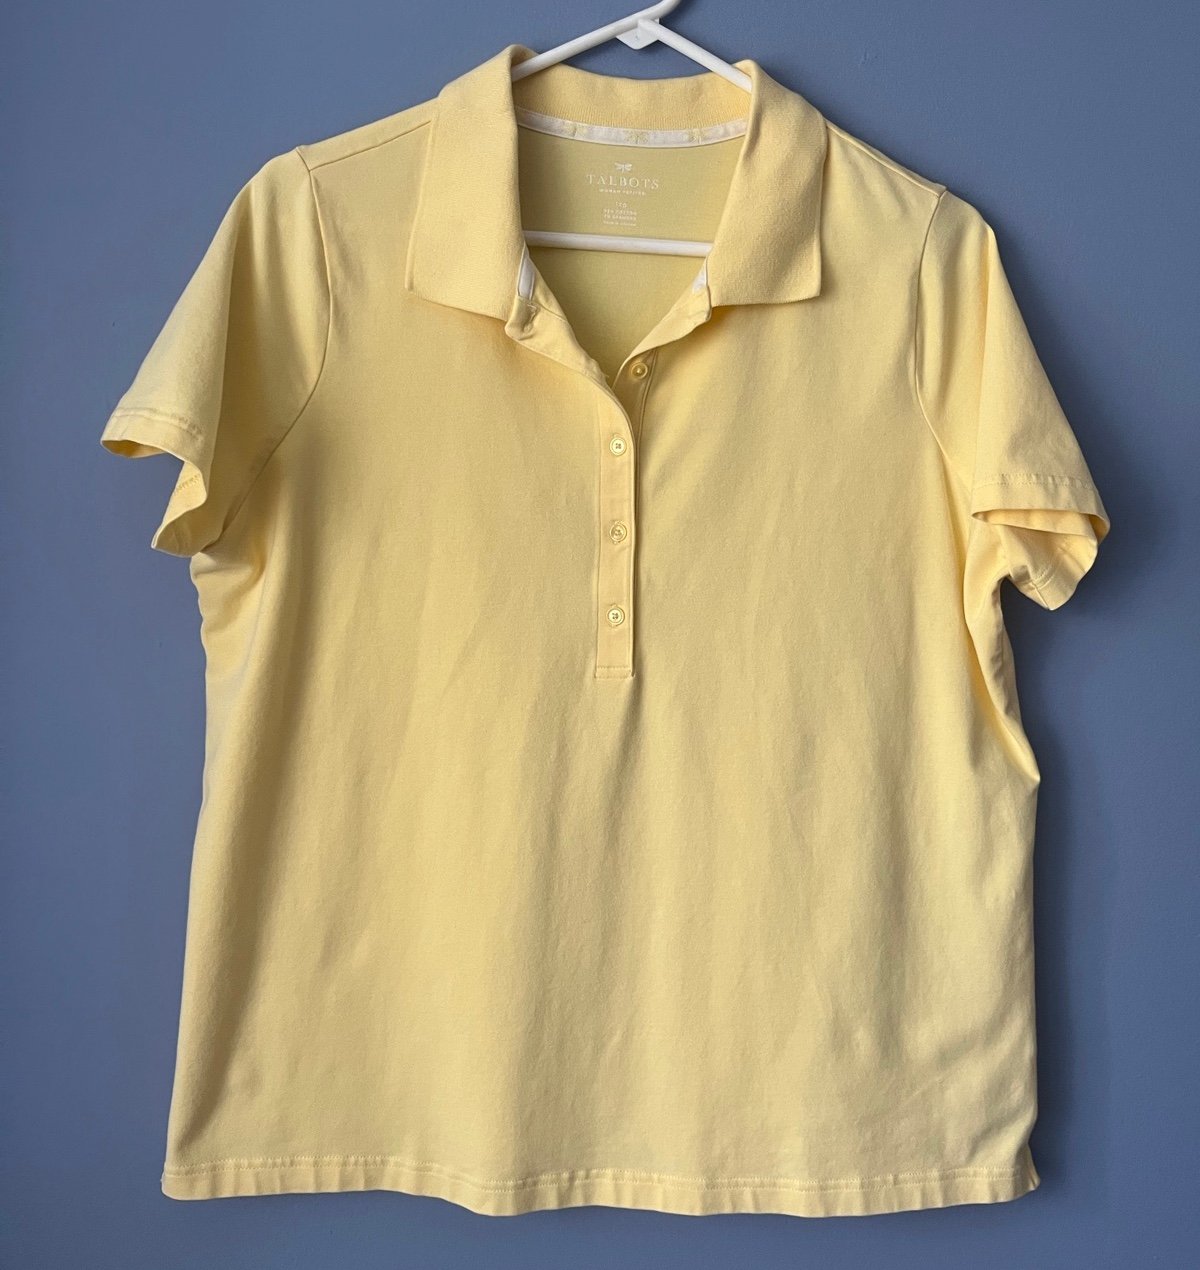 cheapest place to buy  Talbots yellow short sleeve polo shirt 1XP PDLTHZmyD Wholesale